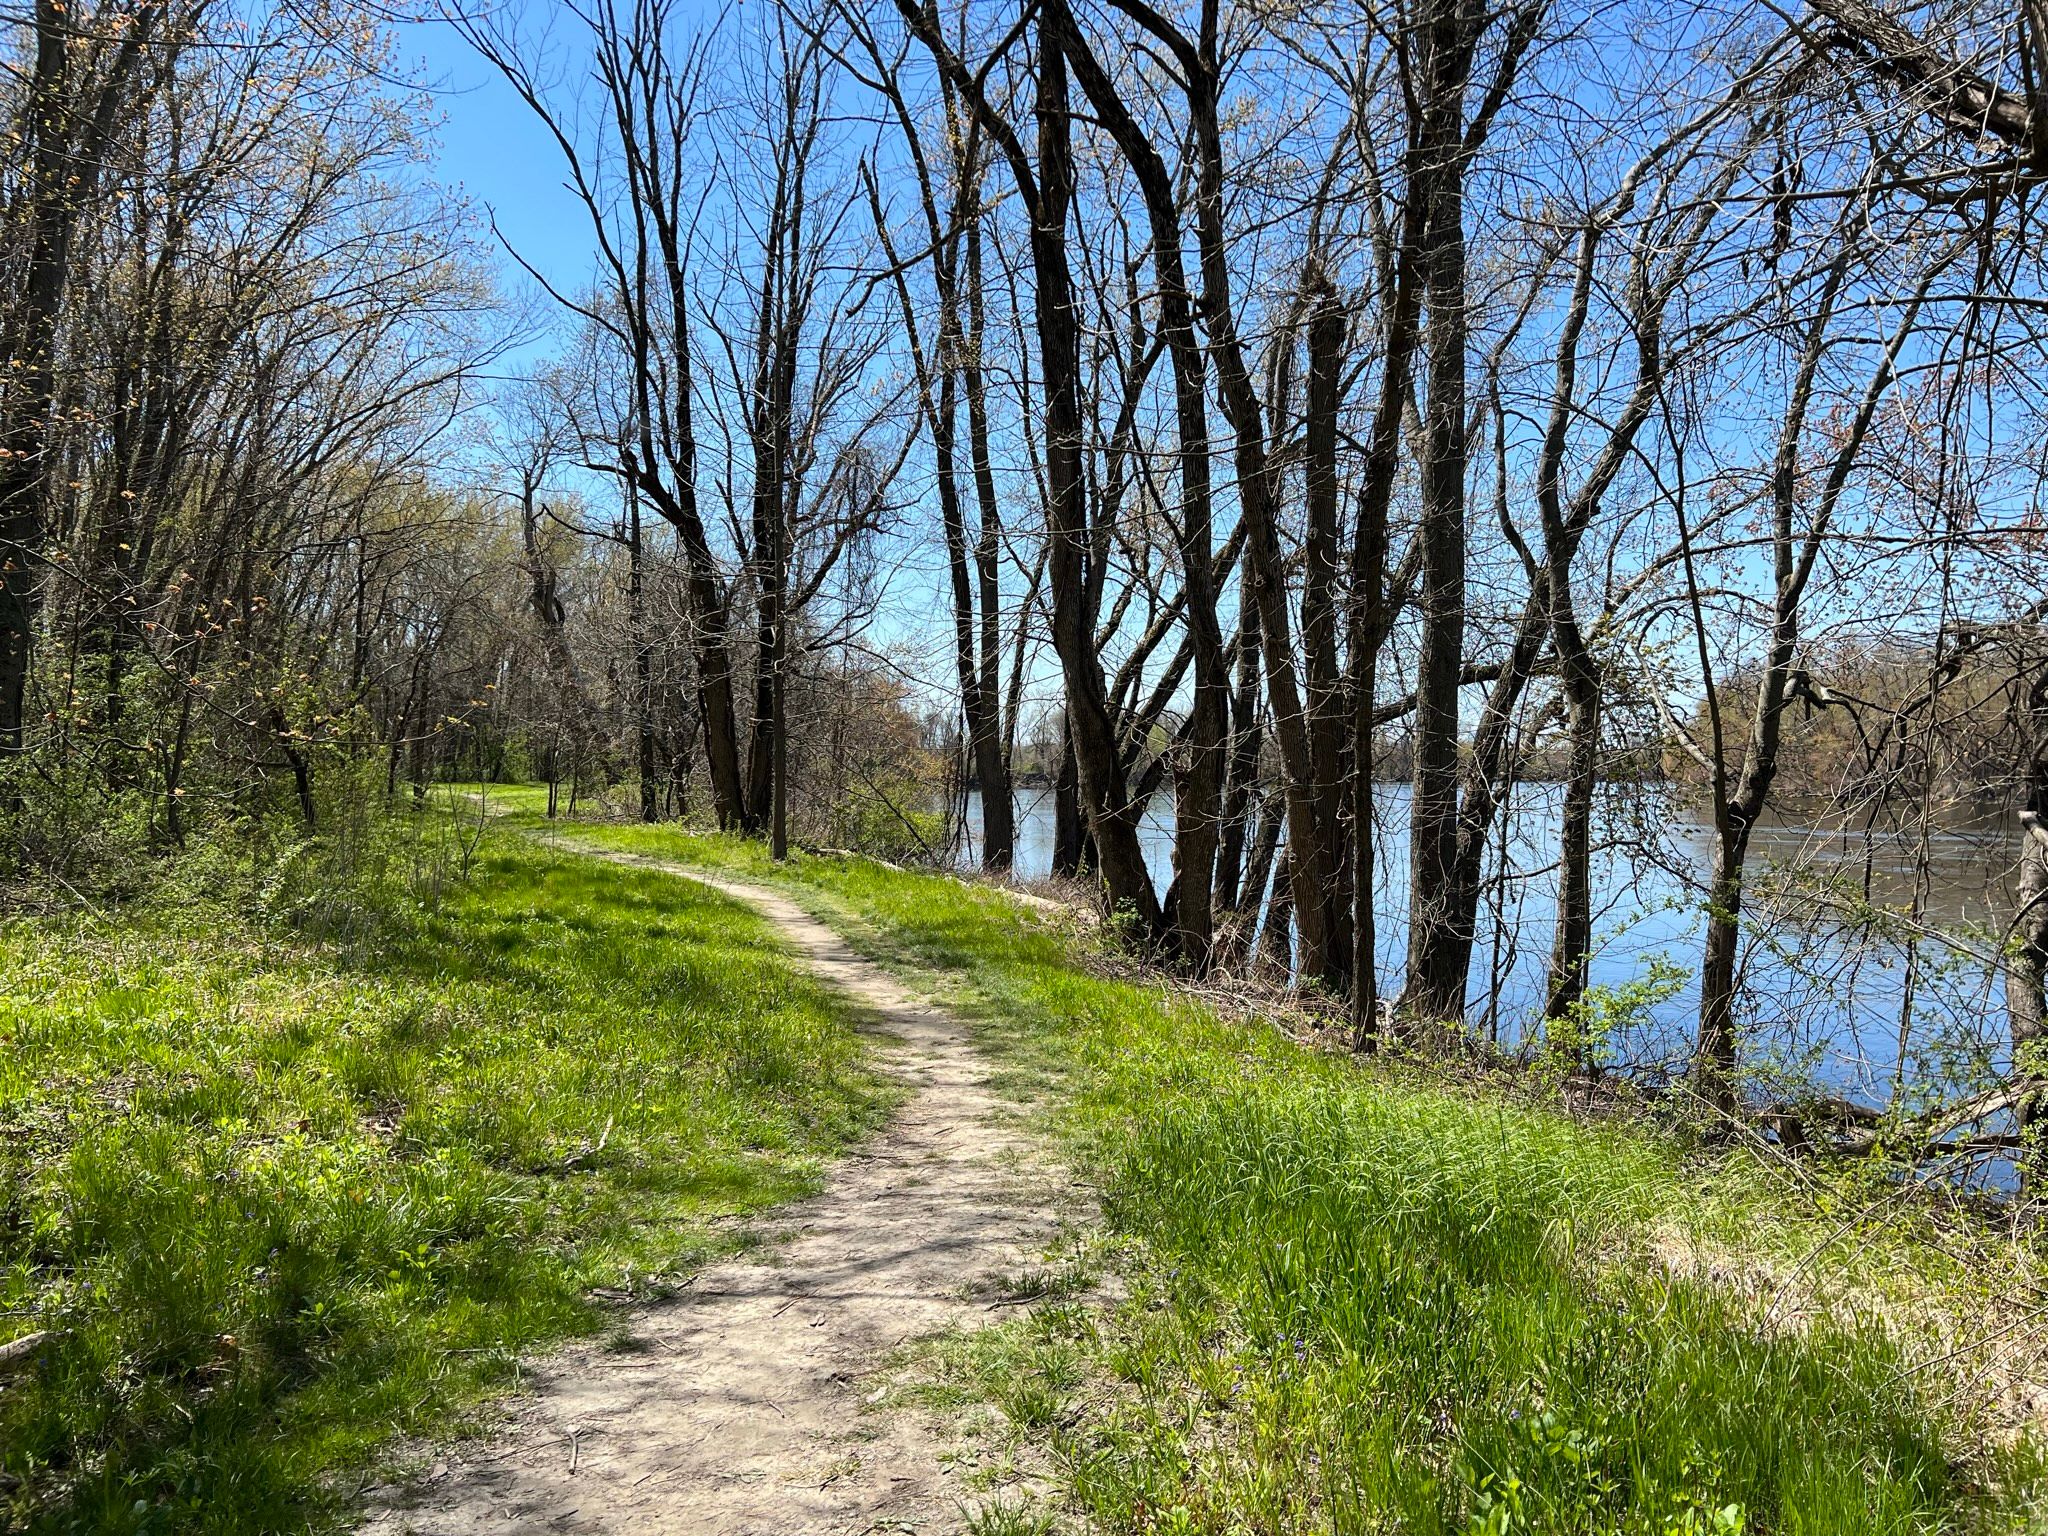 Riverfront Park is a beautiful place to visit for a picnic and a hike.